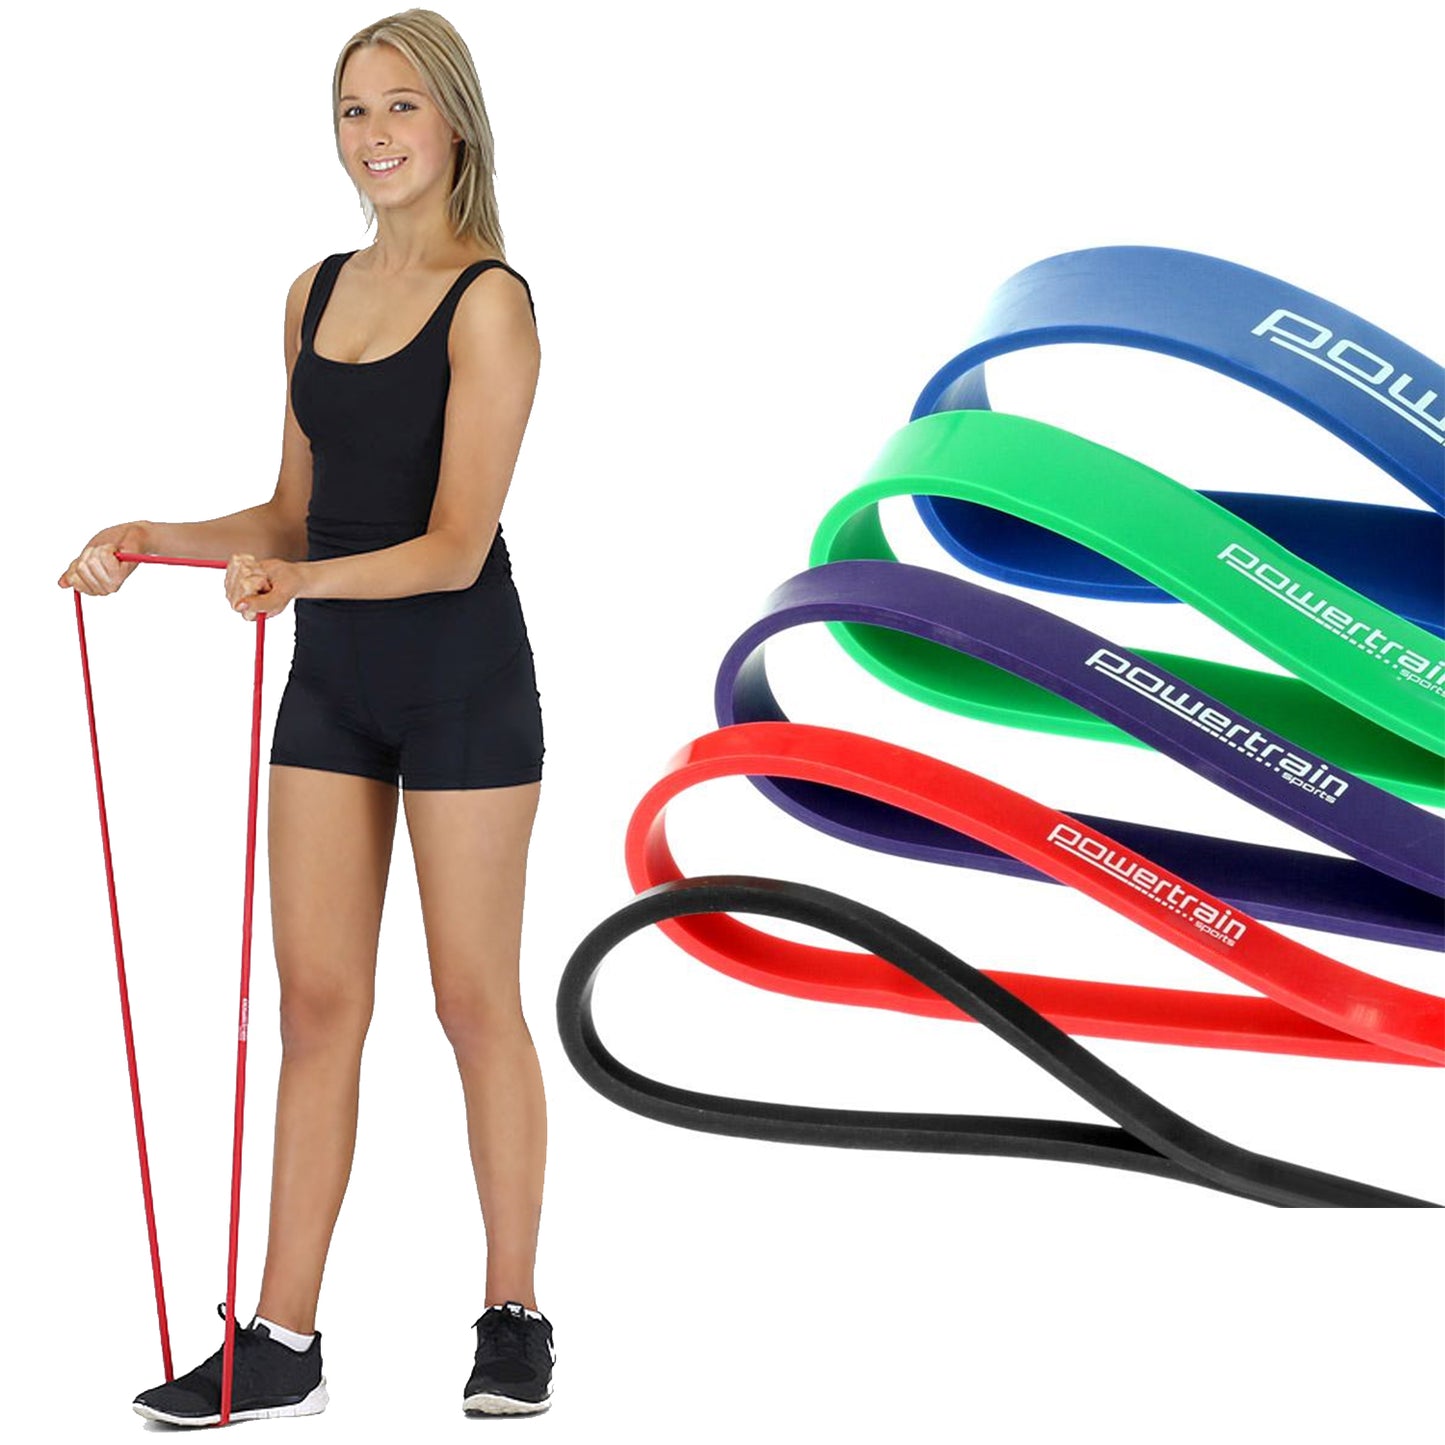 Dynamic 5-Piece Home Workout Resistance Bands Set: Elevate Your Gym Exercise Routine